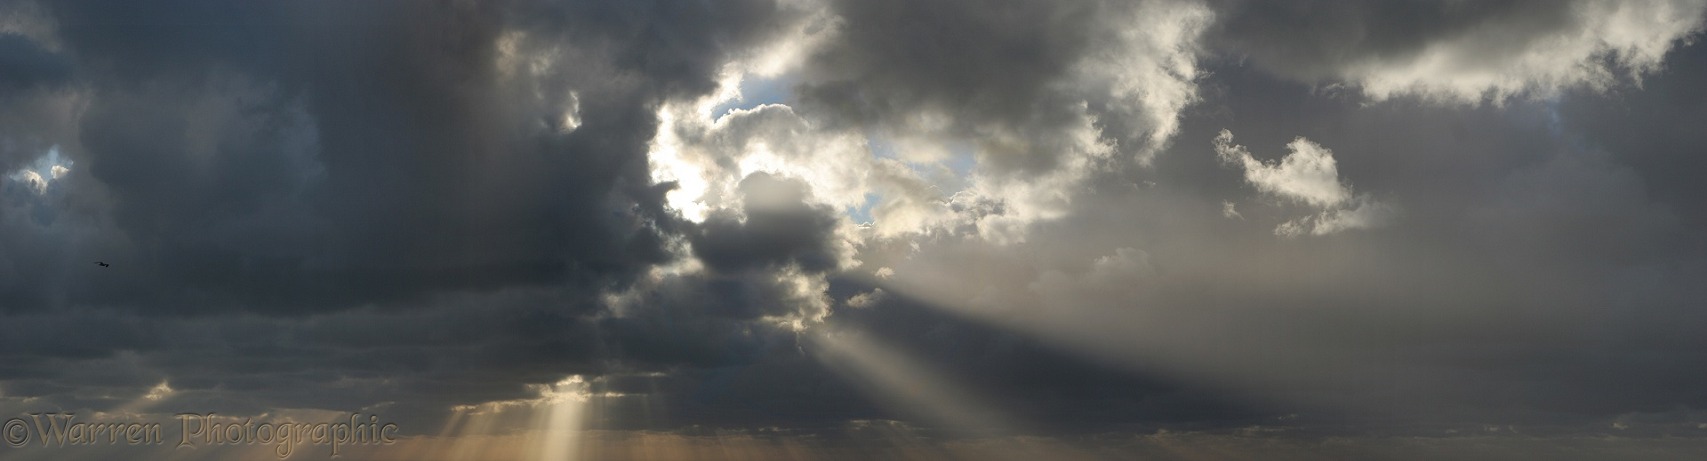 Clouds and sunbeams.  Lundy Island, England